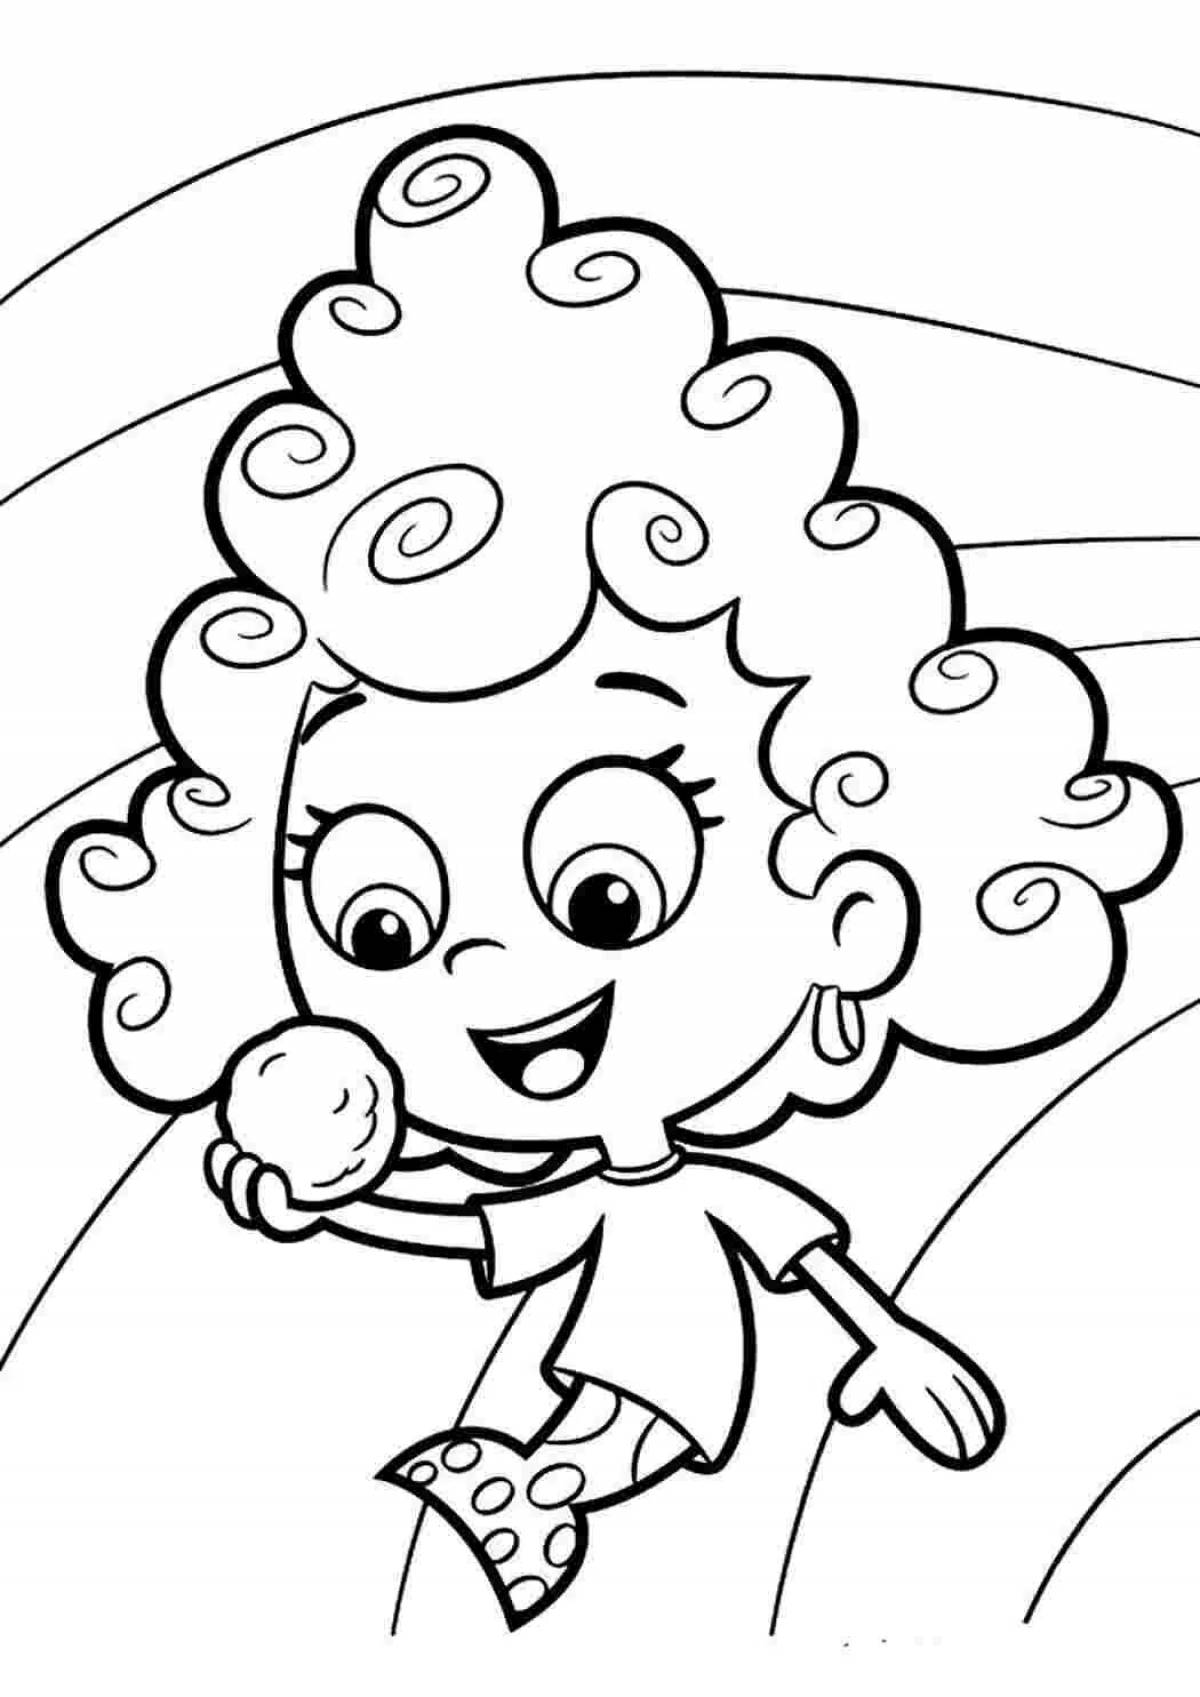 Awesome bubble coloring page